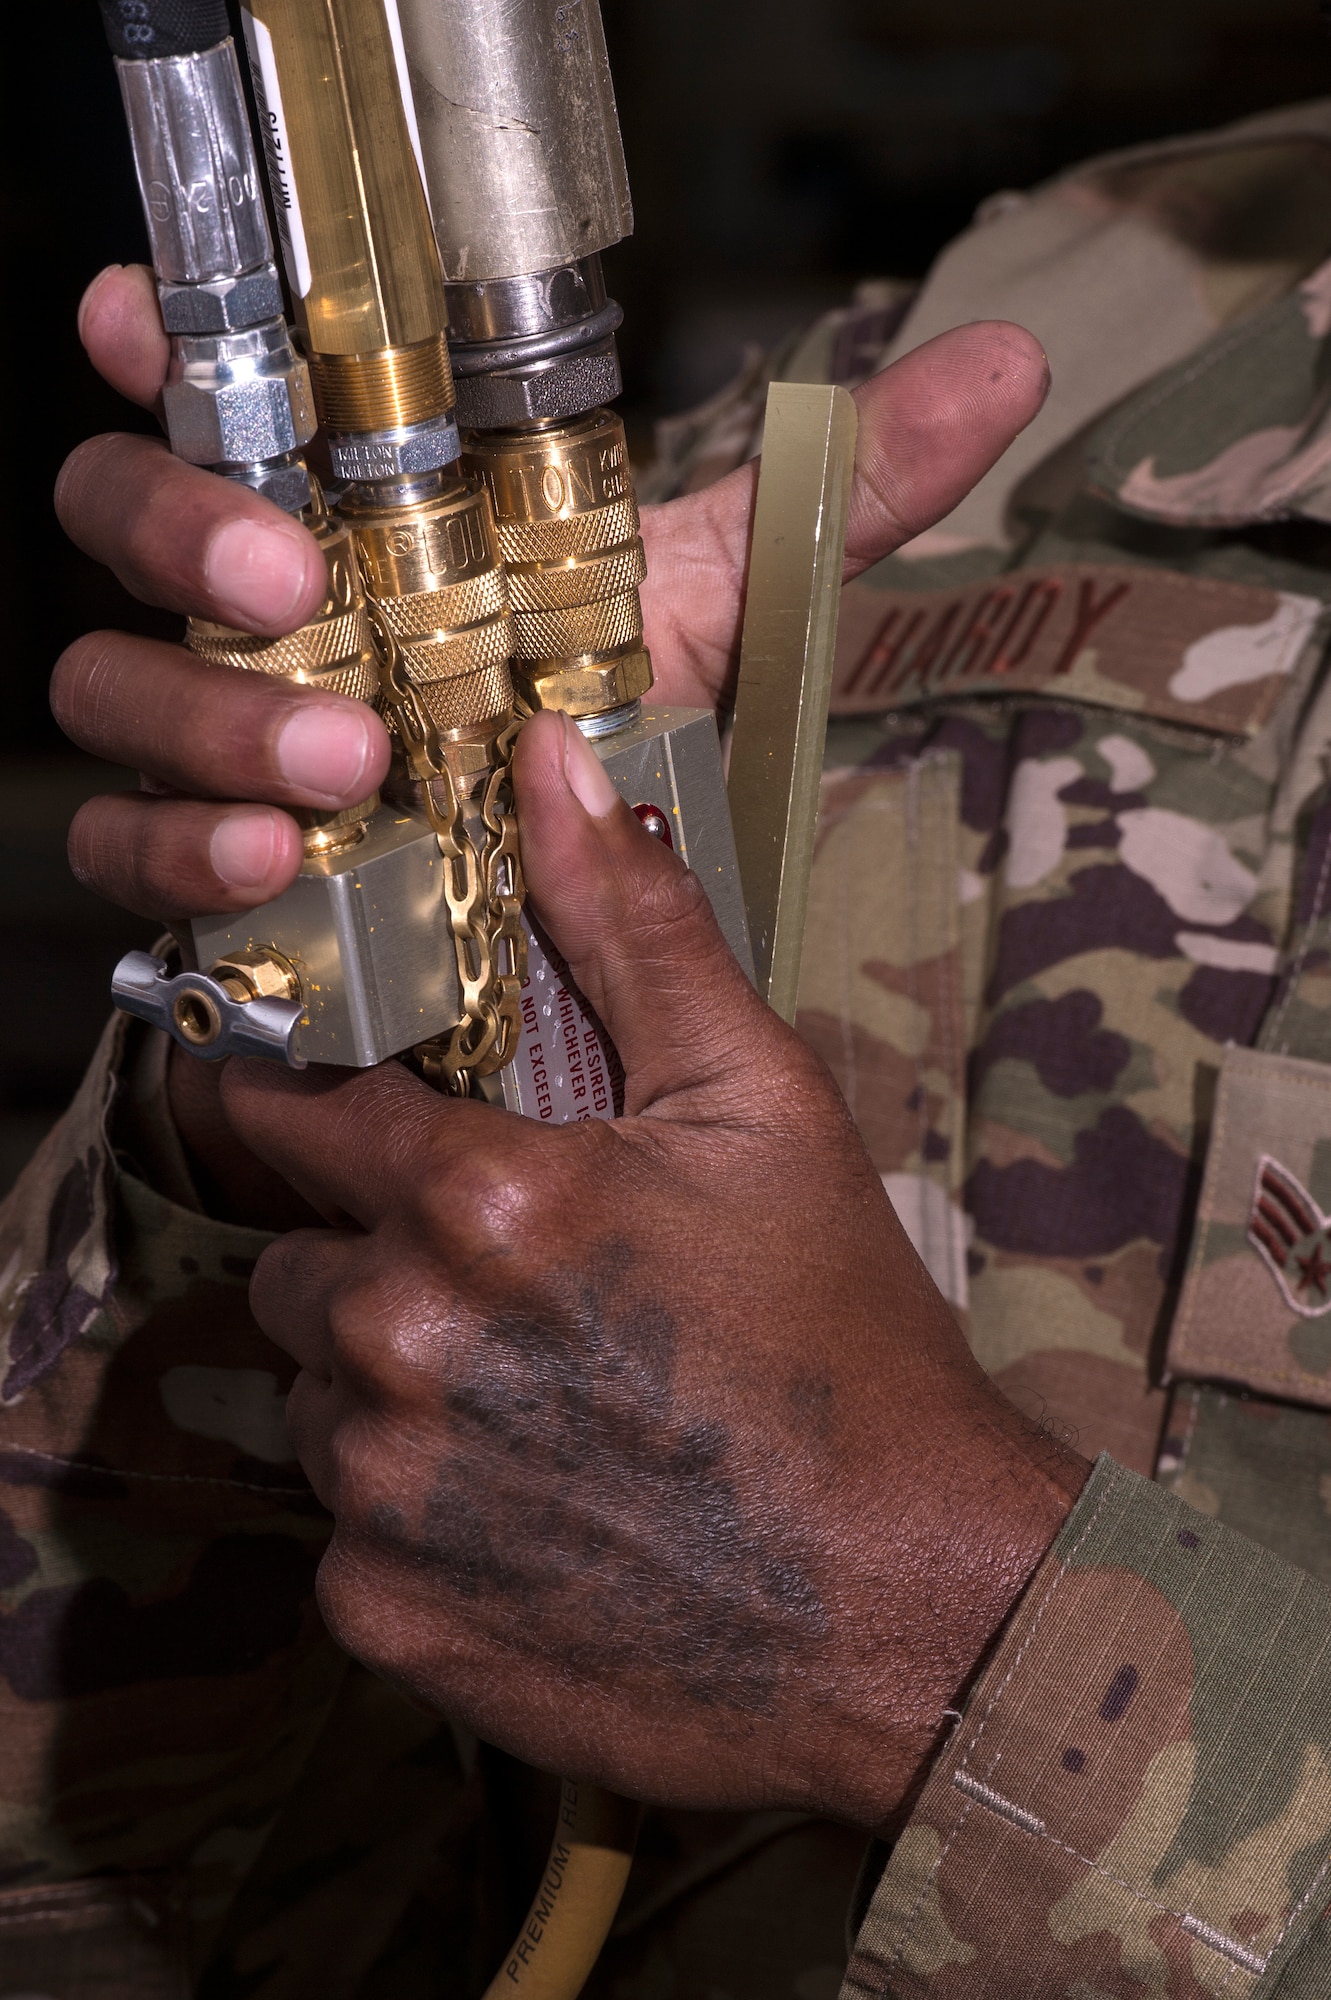 Senior Airman LaTerry Hardy, 379th Expeditionary Maintenance Squadron (EMXS) precision measurement equipment laboratory (PMEL) physical dimensions technician, uses a relief valve to set maximum tire pressures for tire inflator kits Jan. 25, 2019, at Al Udeid Air Base, Qatar. Members of Al Udeid’s PMEL team support other deployed locations across U.S. Air Forces Central Command’s area of responsibility and can forward deploy when equipment isn’t able to be shipped here for repair. The team supports approximately 14,000 pieces of test, measurement and diagnostic equipment used by various other career fields. (U.S. Air Force Tech. Sgt. Christopher Hubenthal)